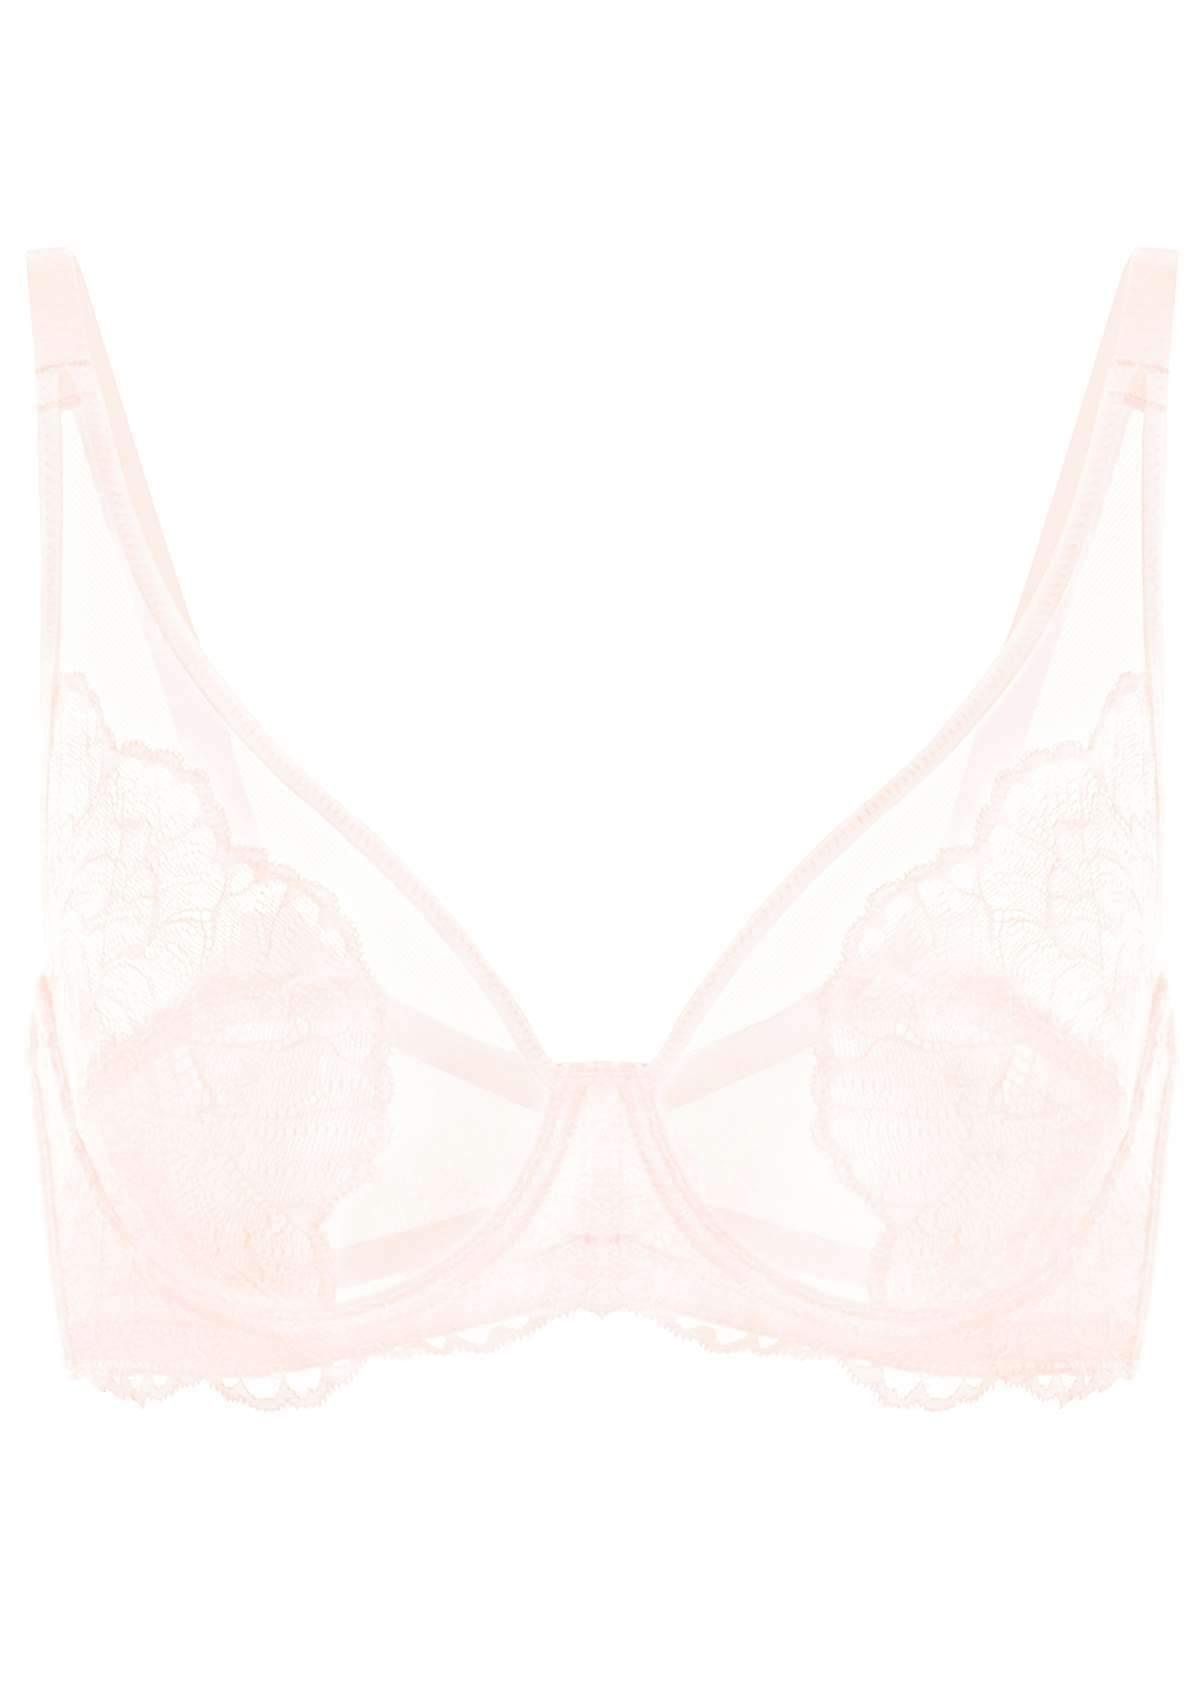 HSIA Blossom Sheer Lace Bra: Comfortable Underwire Bra For Big Busts - White / 34 / G